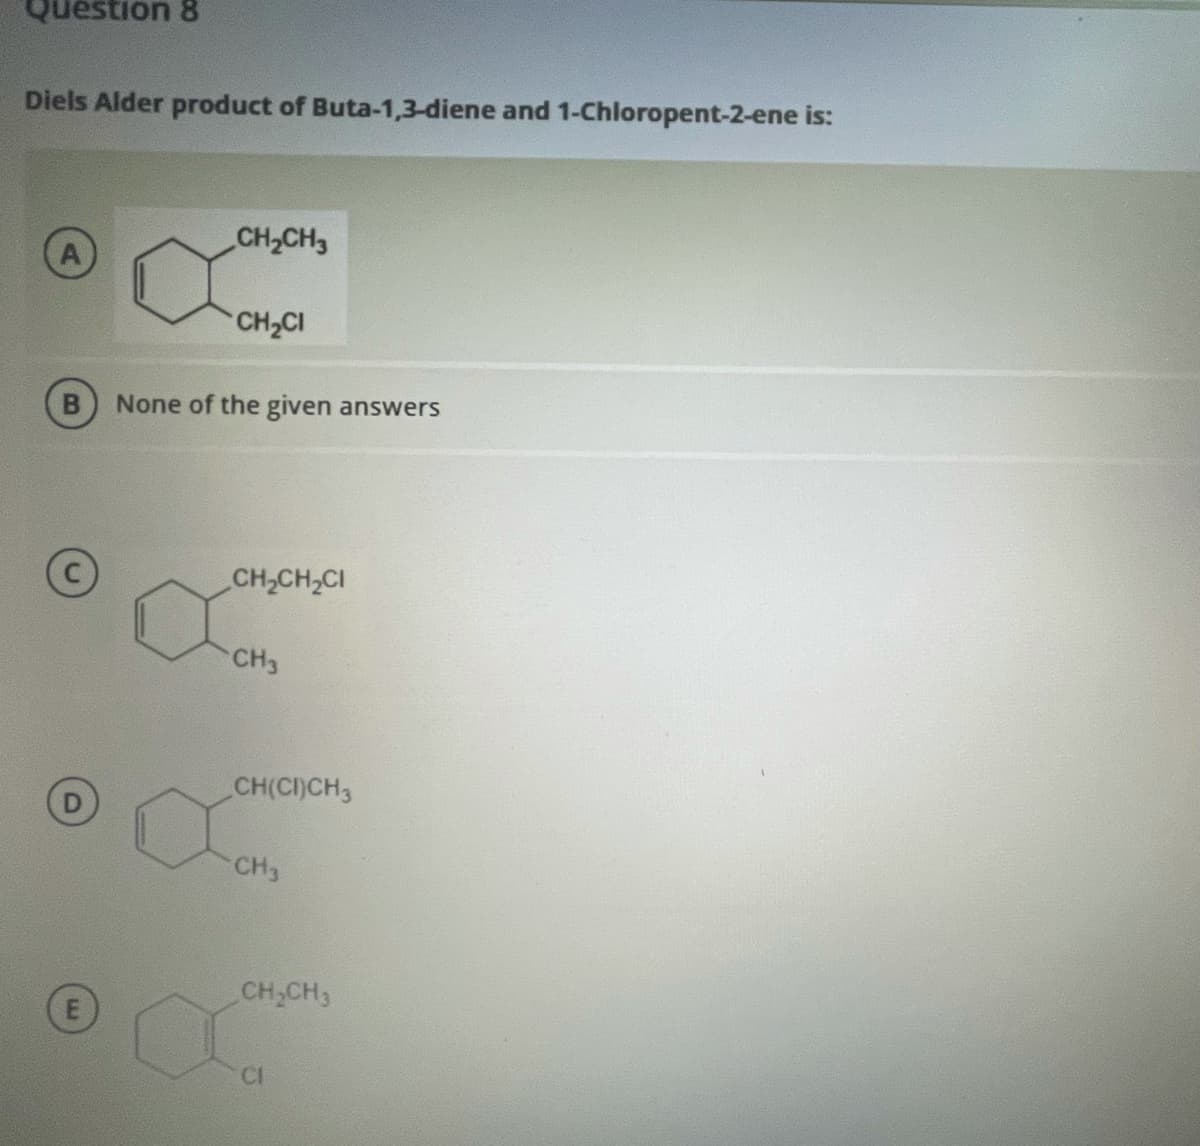 Question 8
Diels Alder product of Buta-1,3-diene and 1-Chloropent-2-ene is:
CH2CH3
CH2CI
None of the given answers
CH,CH,CI
CH3
CH(CI)CH3
CH3
CH,CH3
CI
E.
